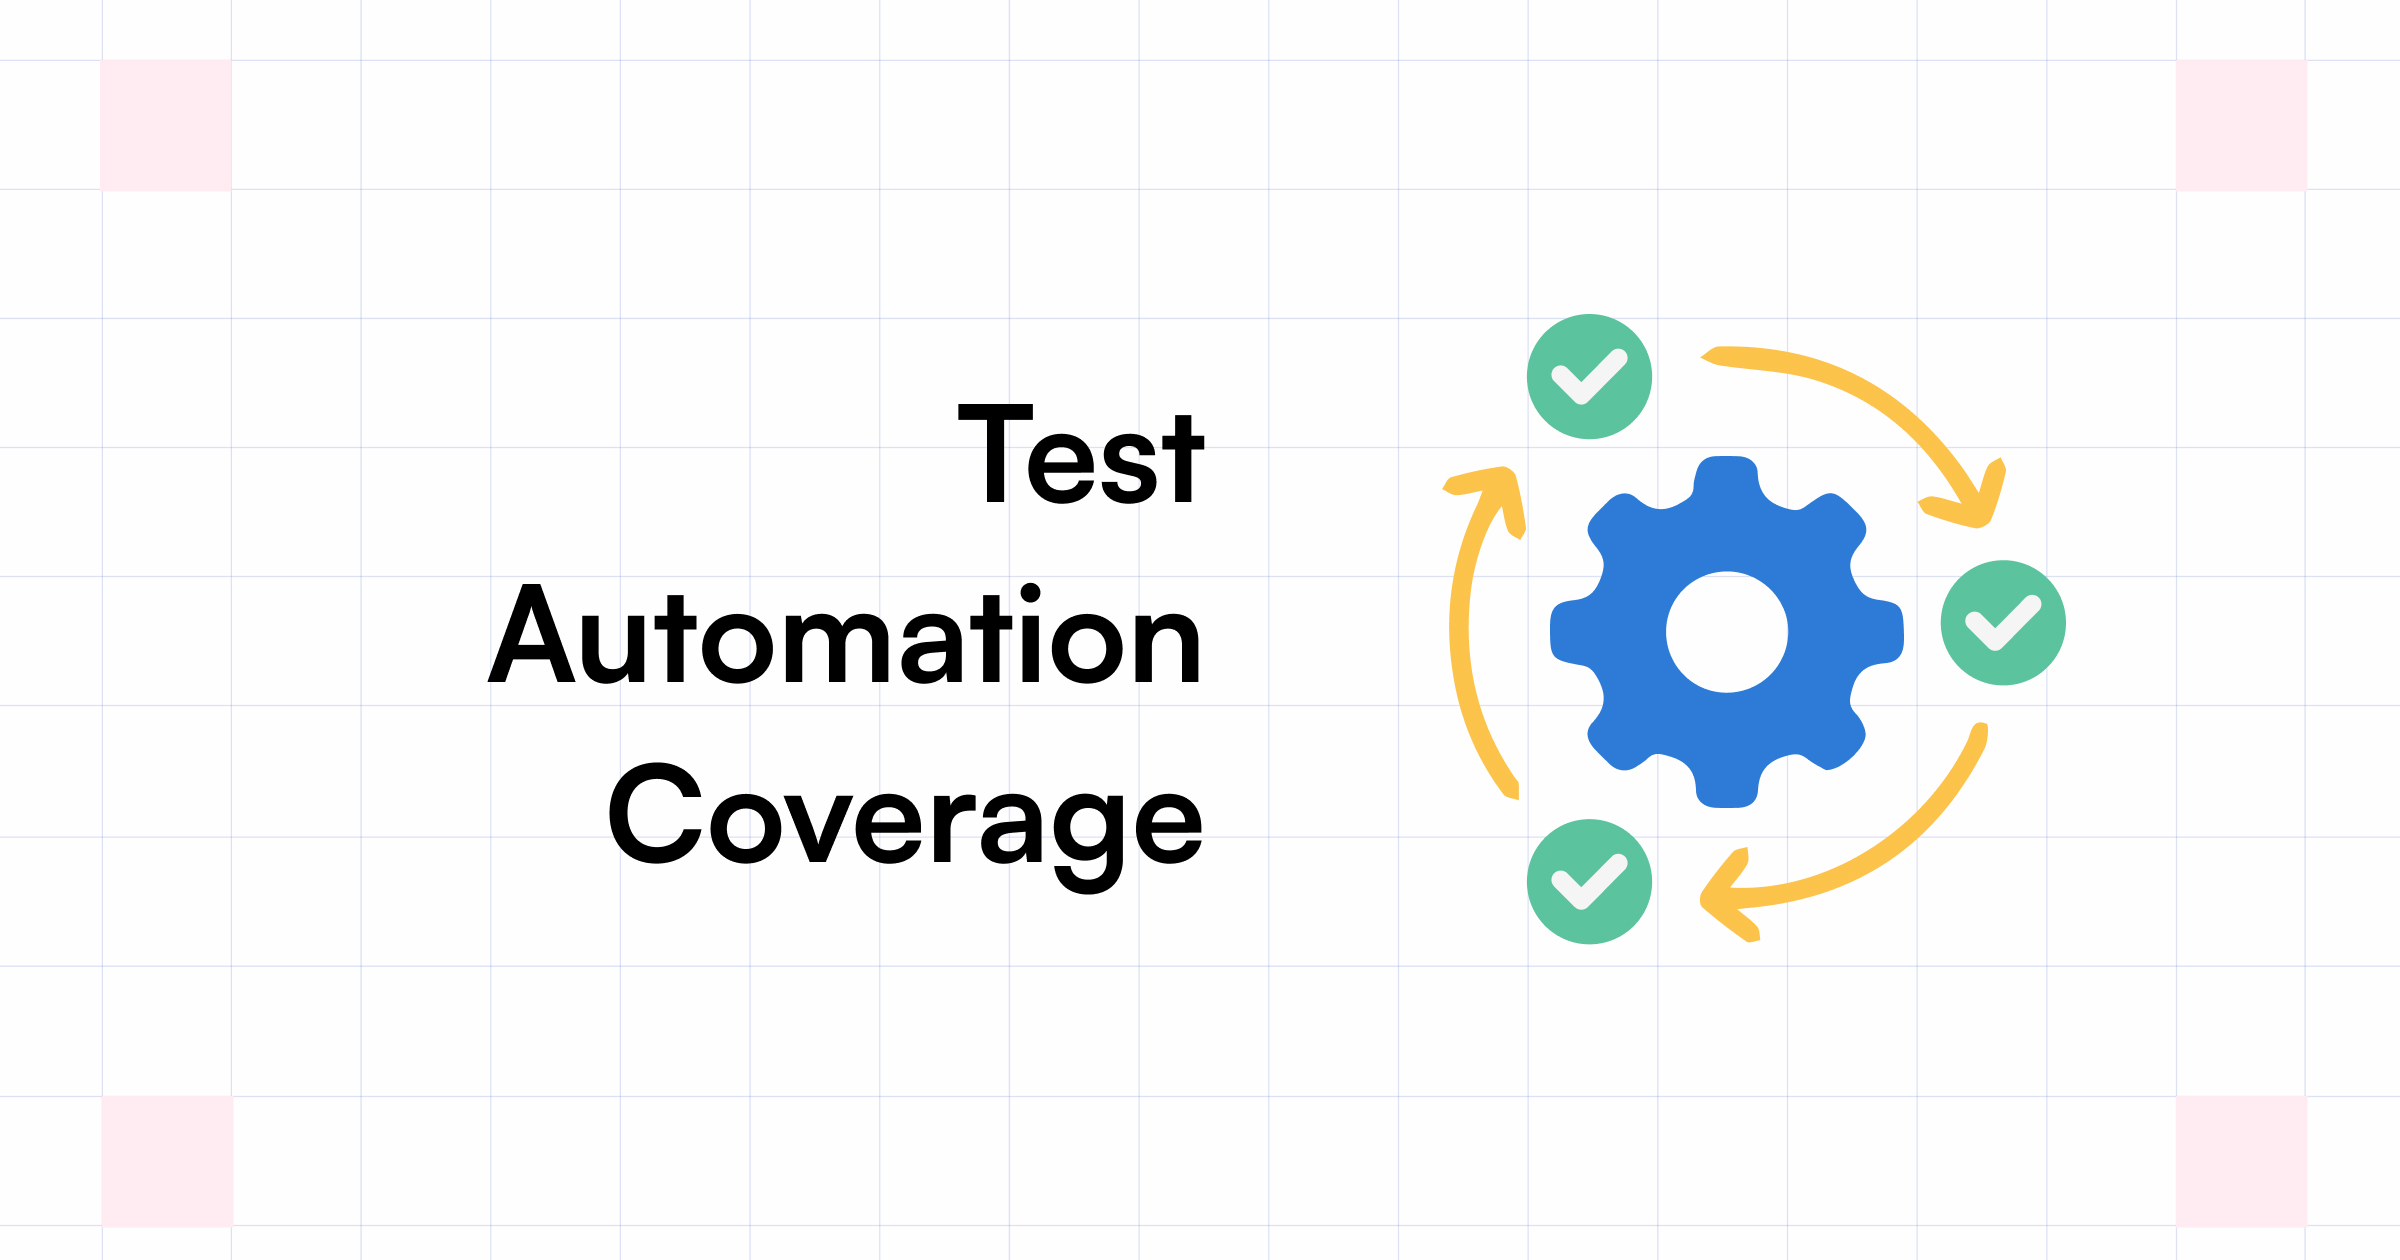 Test Automation Coverage